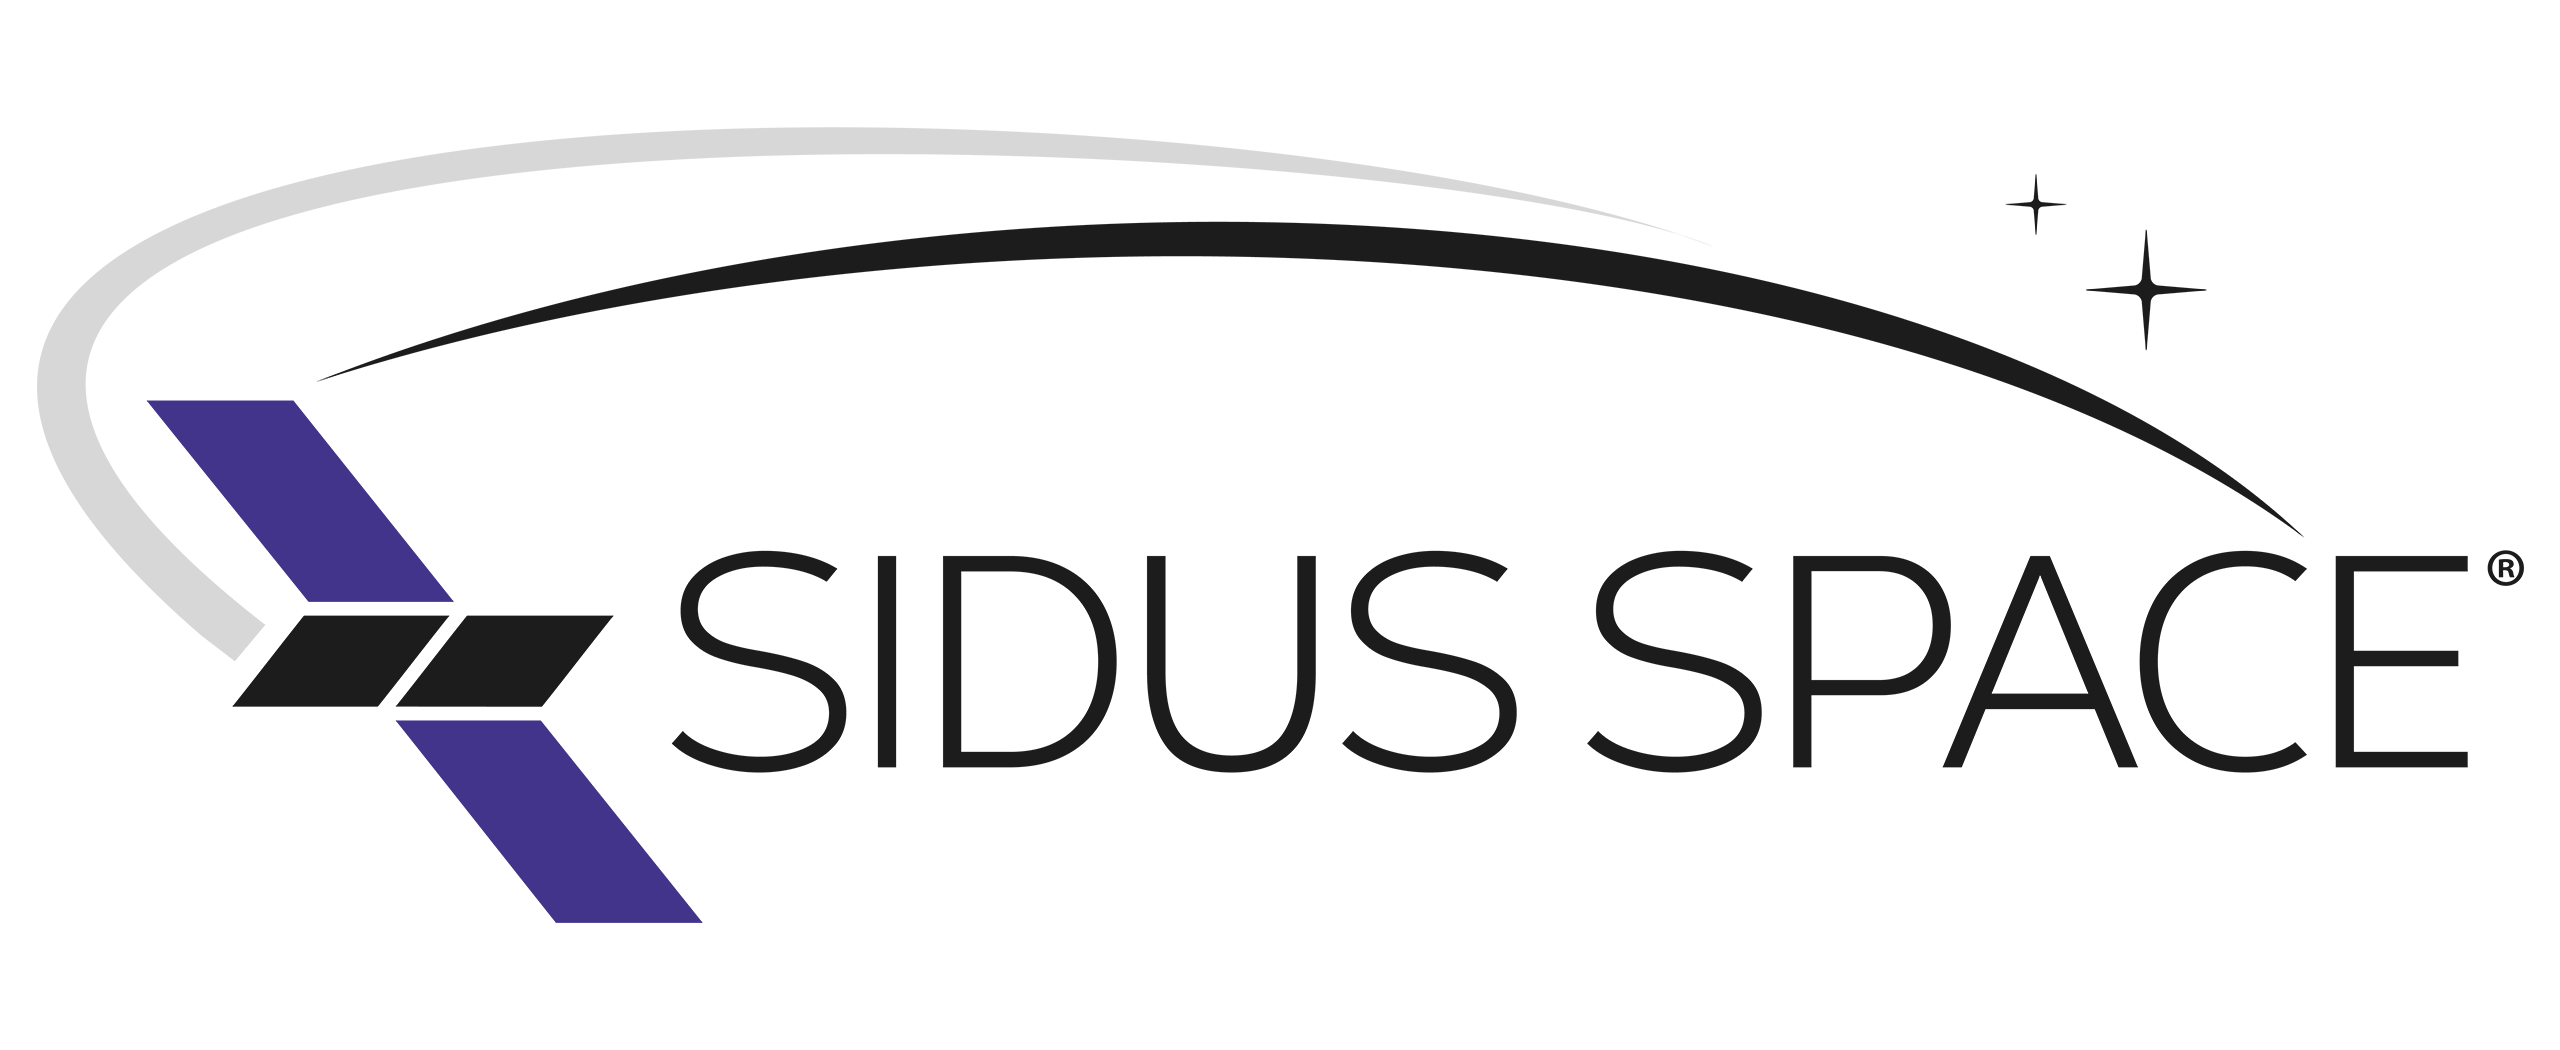 Sidus Space Traditional 300ppi